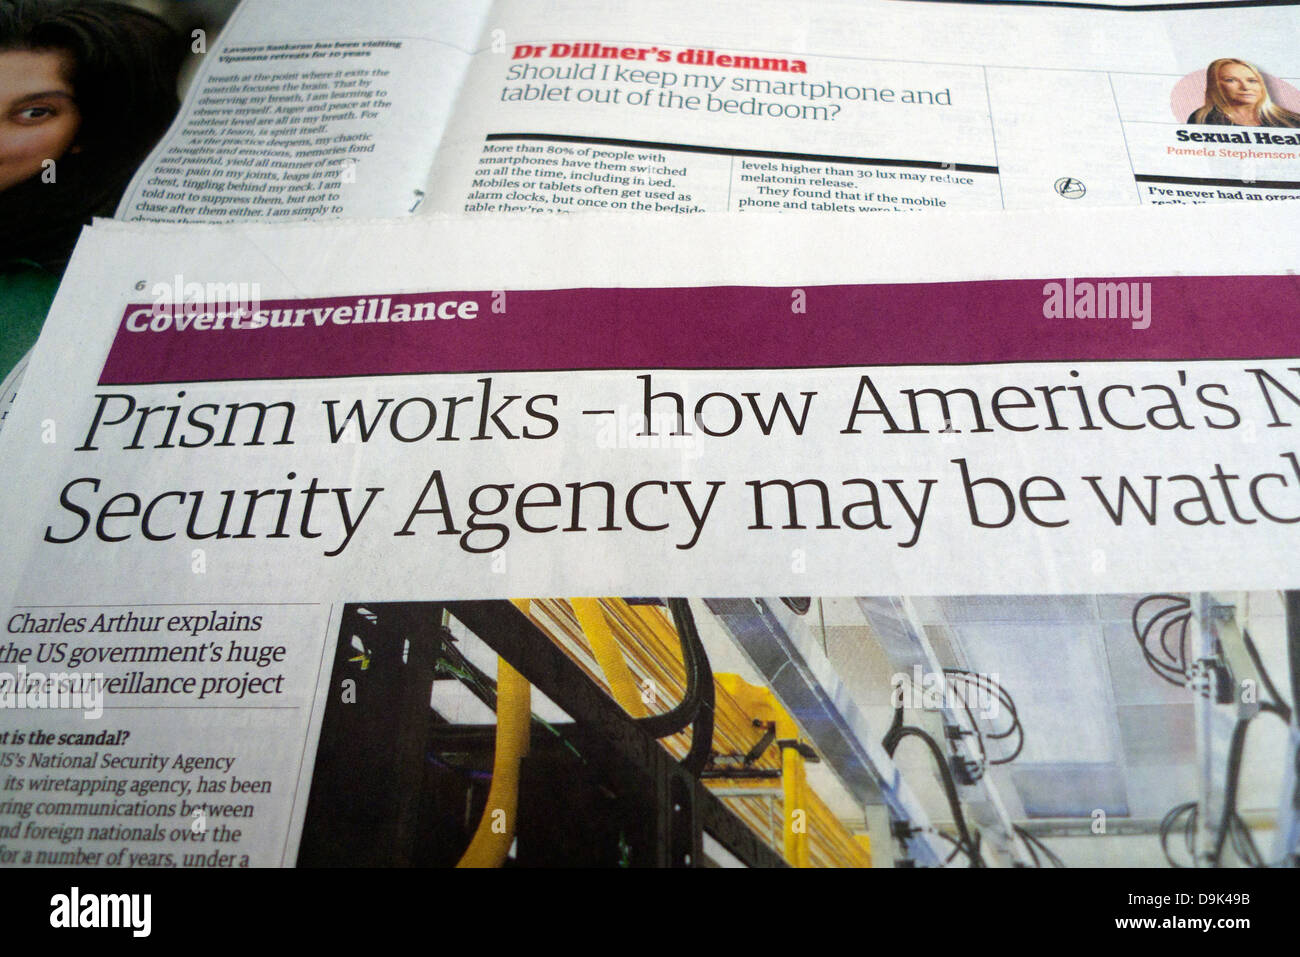 Guardian Zeitung Headline Surveillance article Clipping 'Prism Works - how America's National Security Agency may be watching you' UK 8 June 2013 Stockfoto